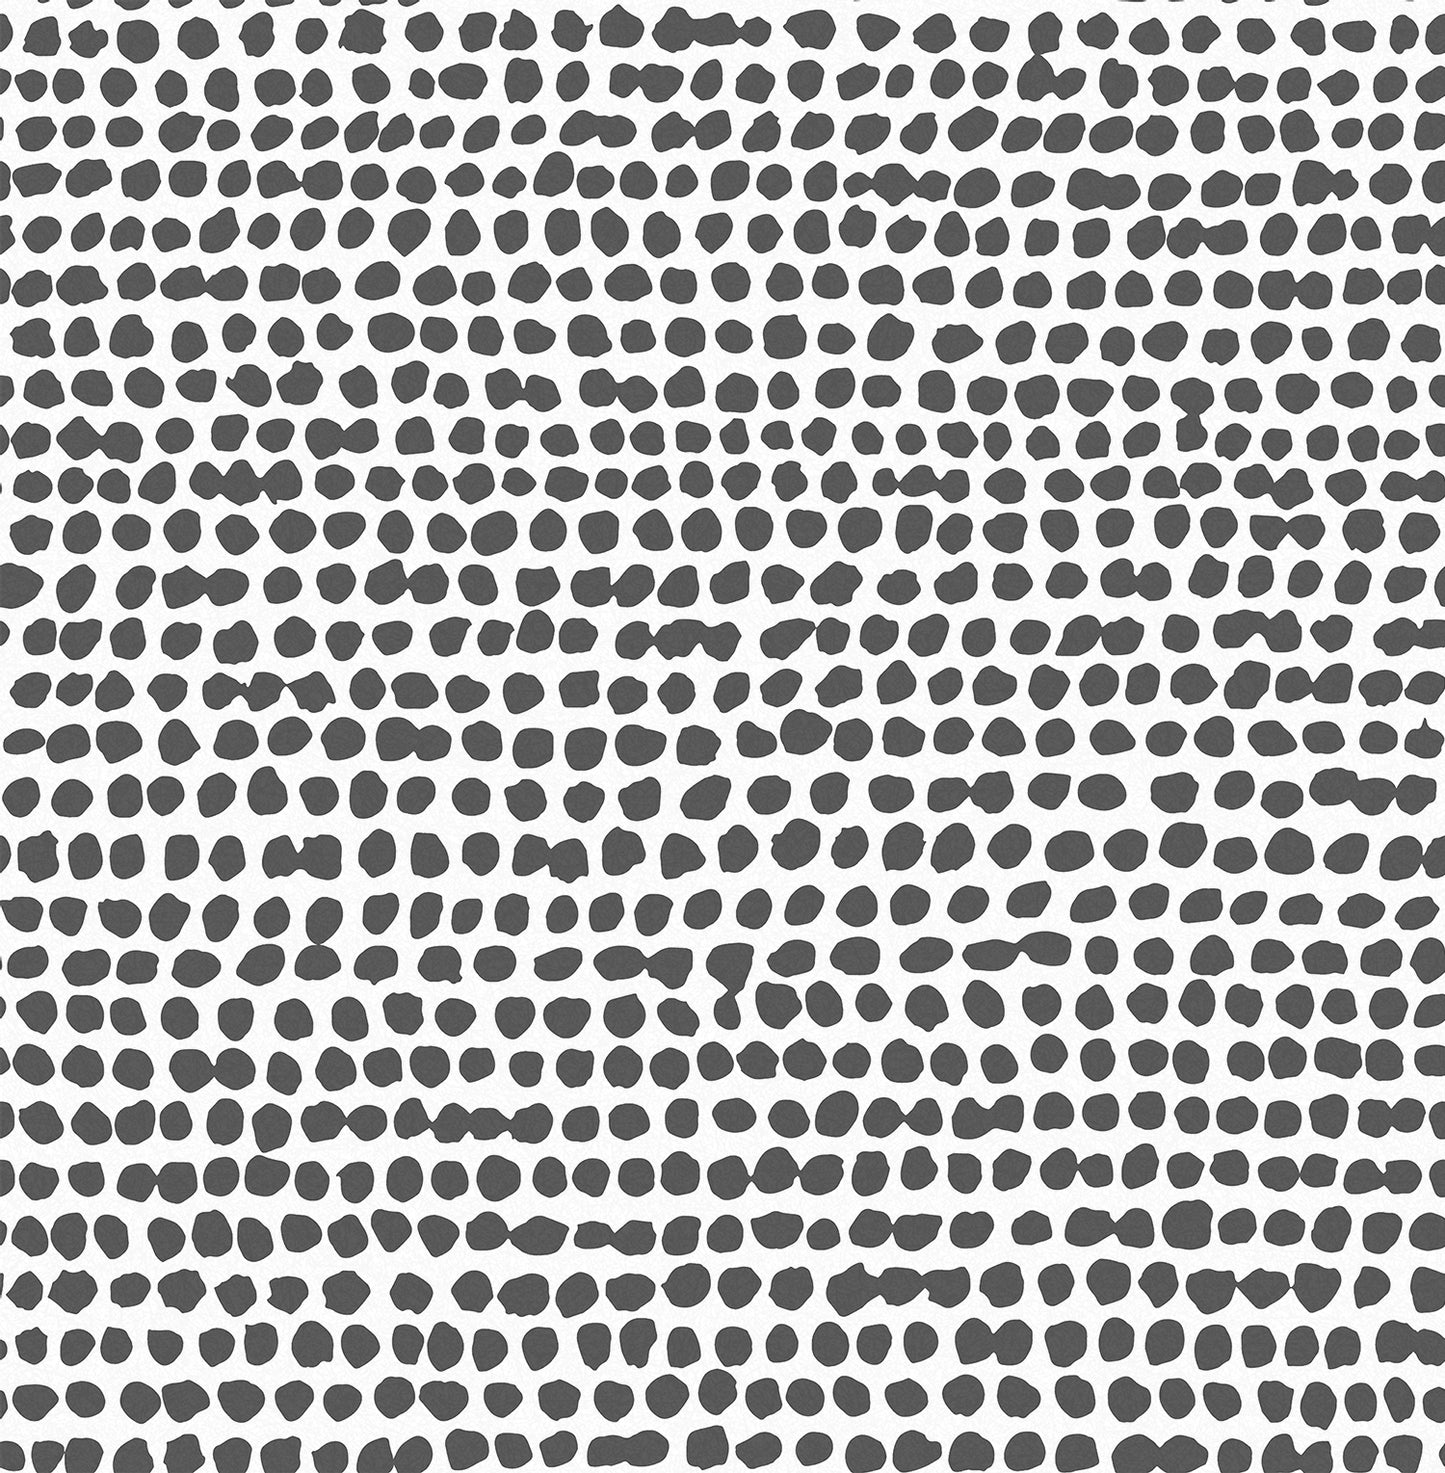 Order Graham & Brown Wallpaper Dots Black and White Removable Wallpaper